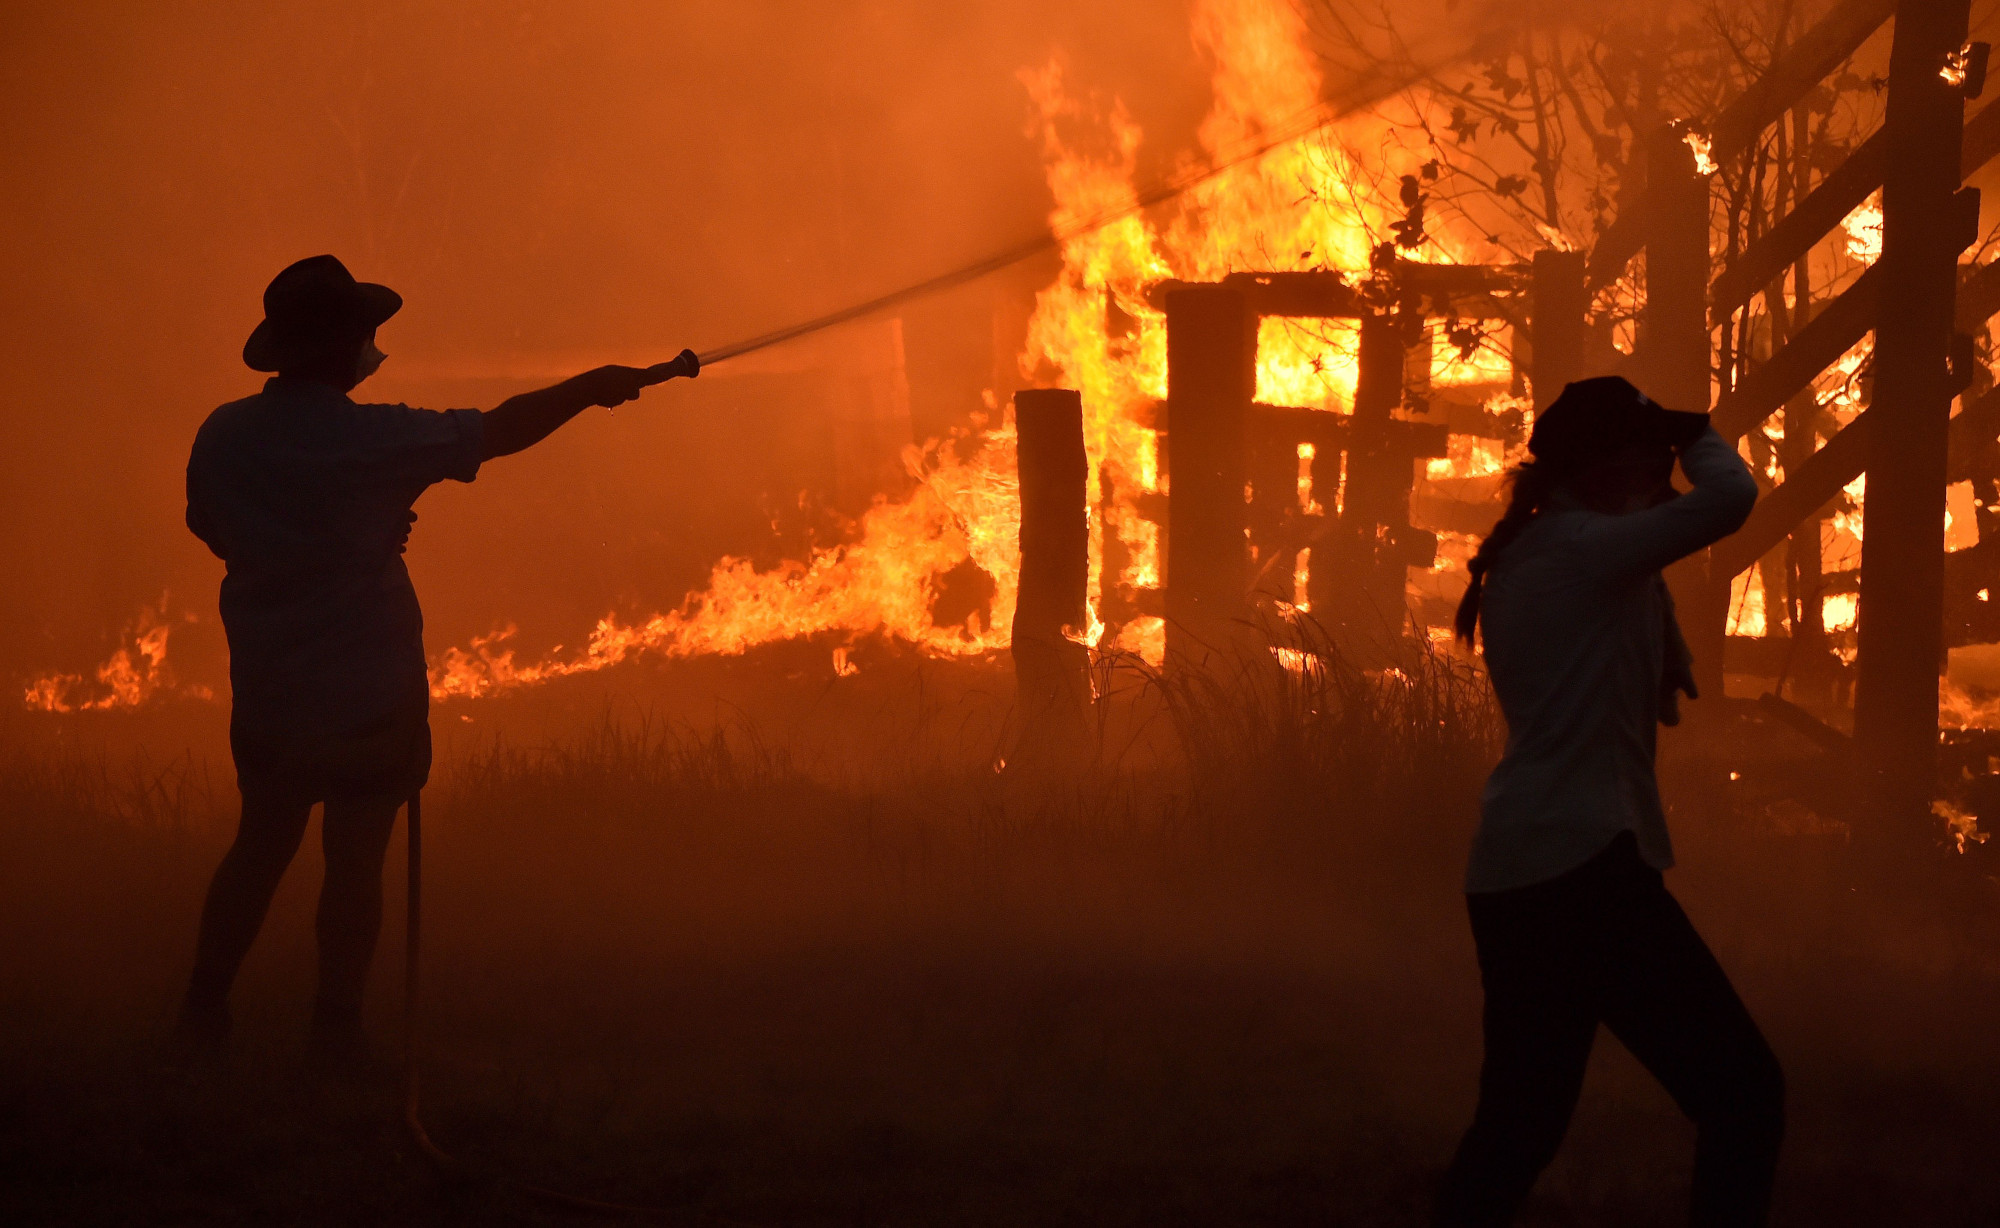 Catastrophic Australia fires are the latest climate change horror – here are the facts - Greenpeace UK